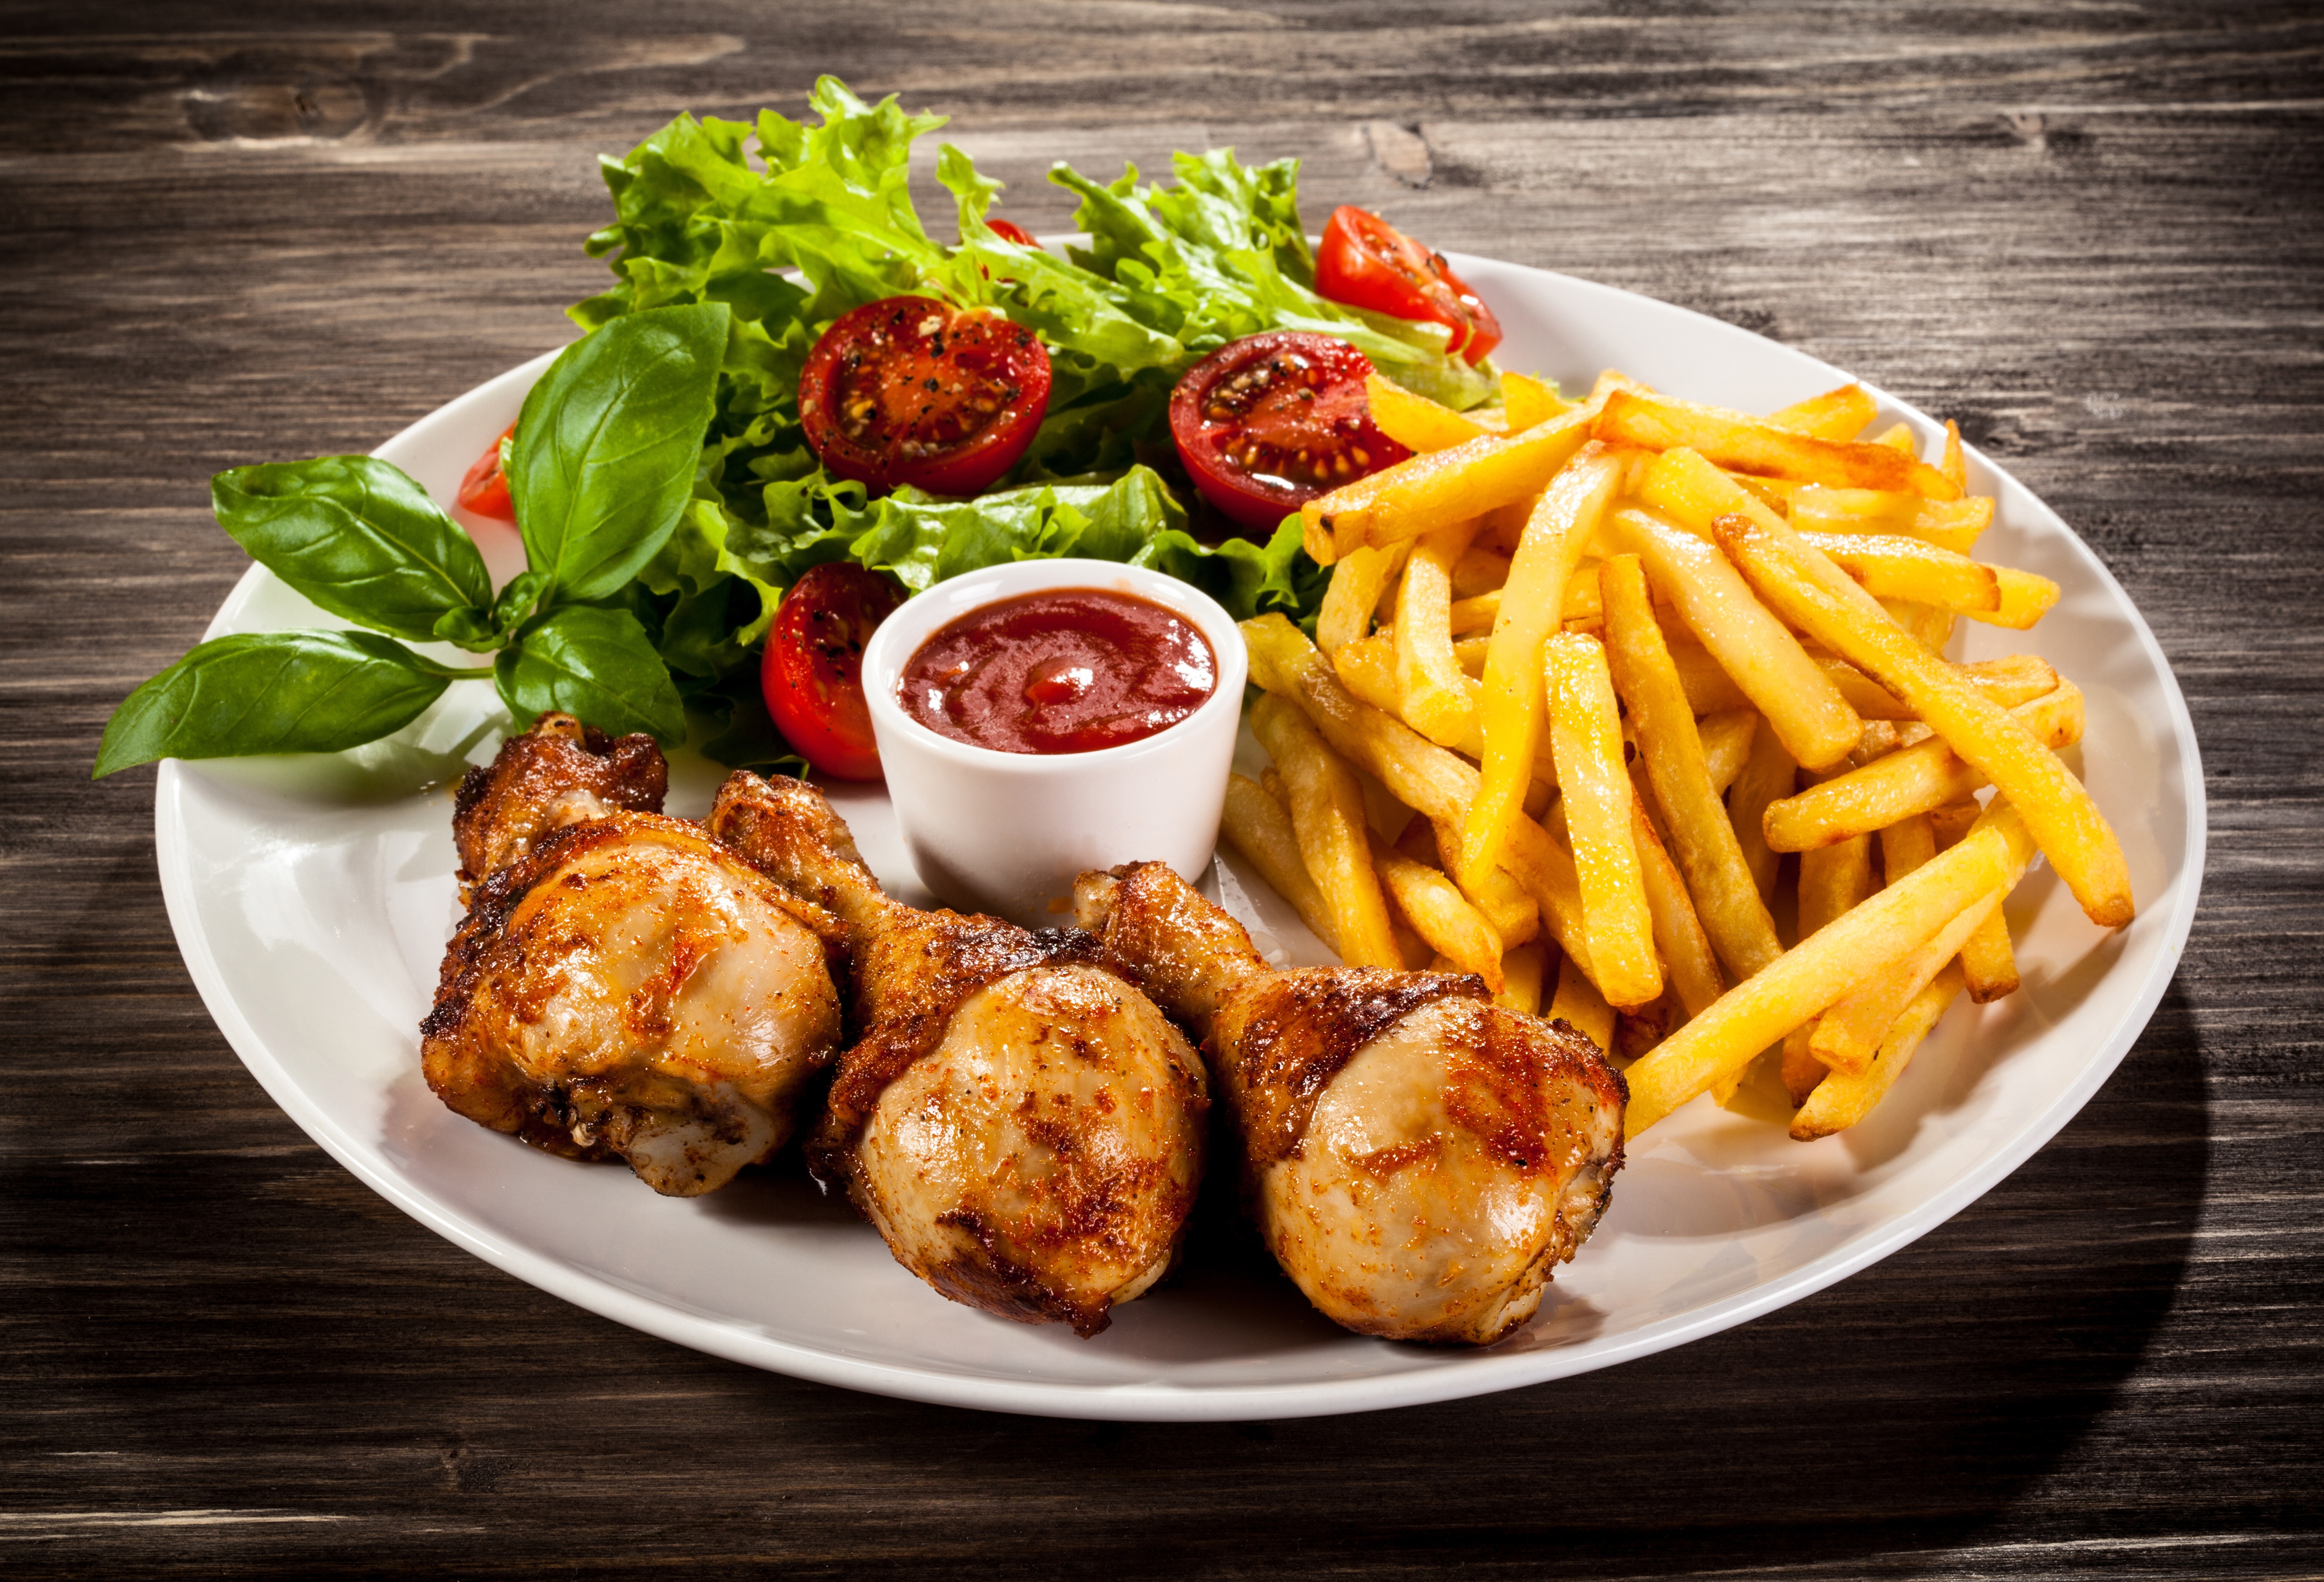 food, meal, chicken, french fries, ketchup, meat, plate, tomato wallpaper for mobile